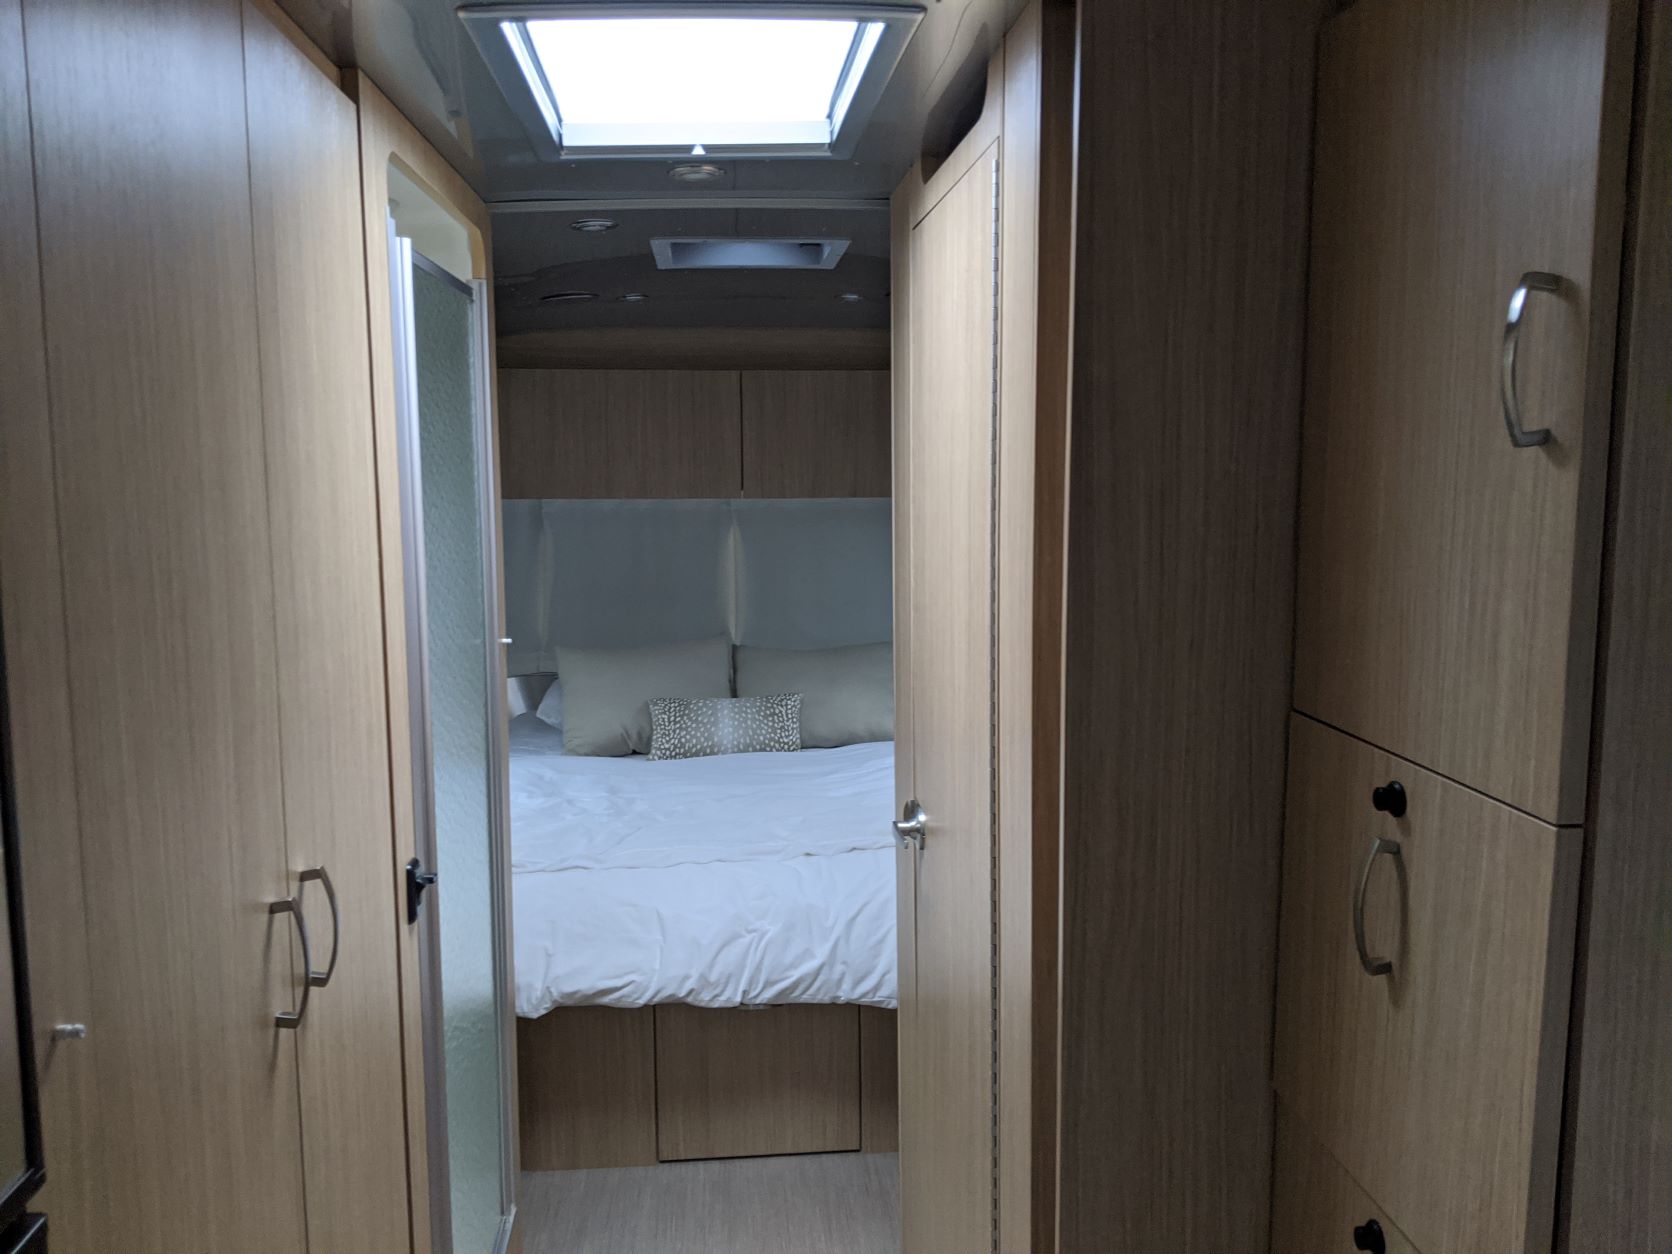 Airstream interior bedroom from hall